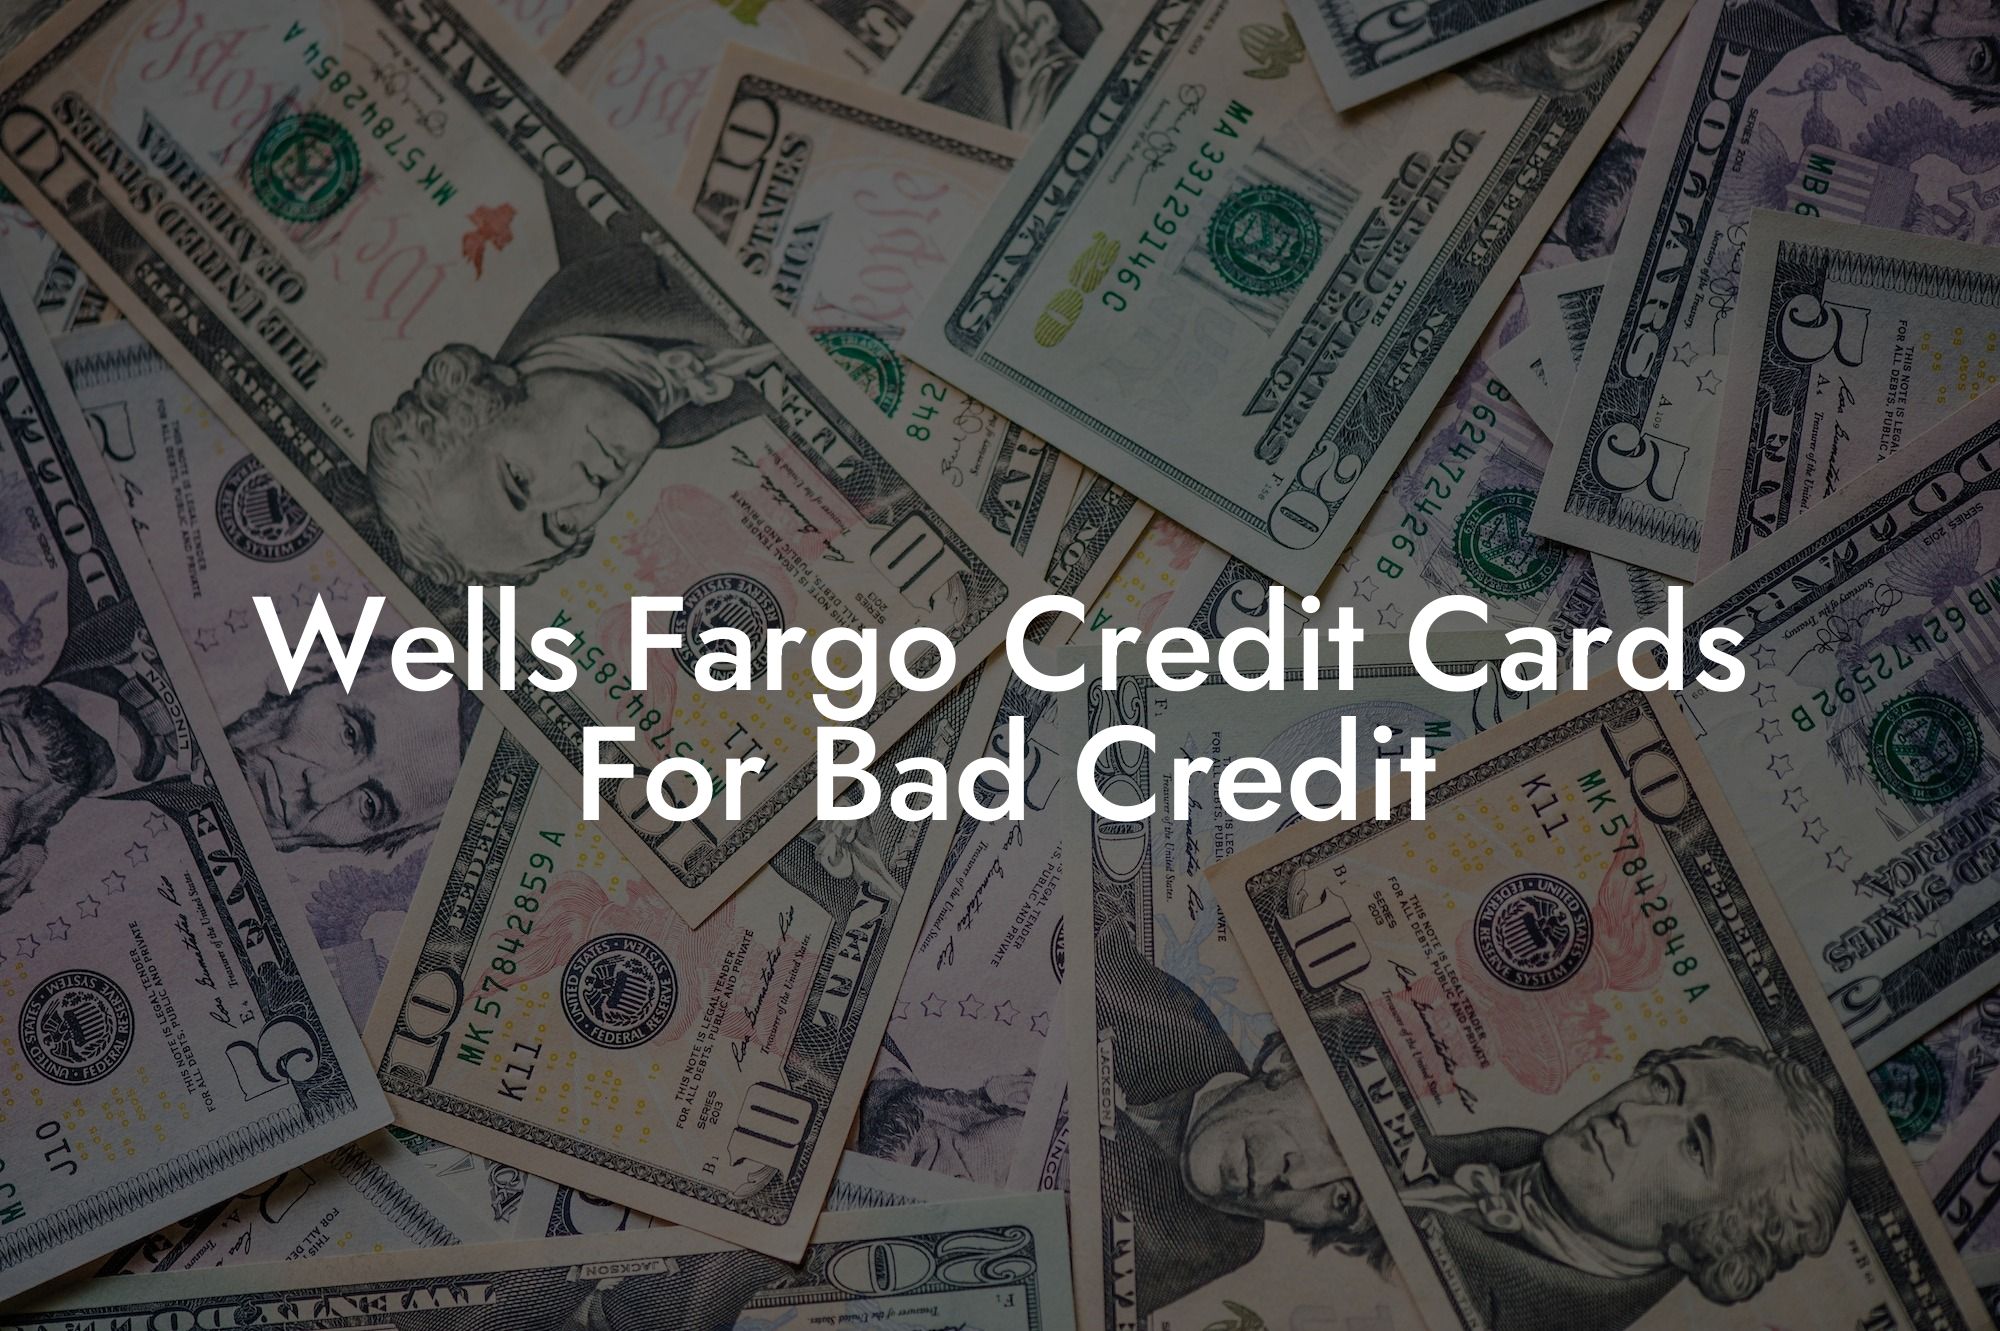 Wells Fargo Credit Cards For Bad Credit